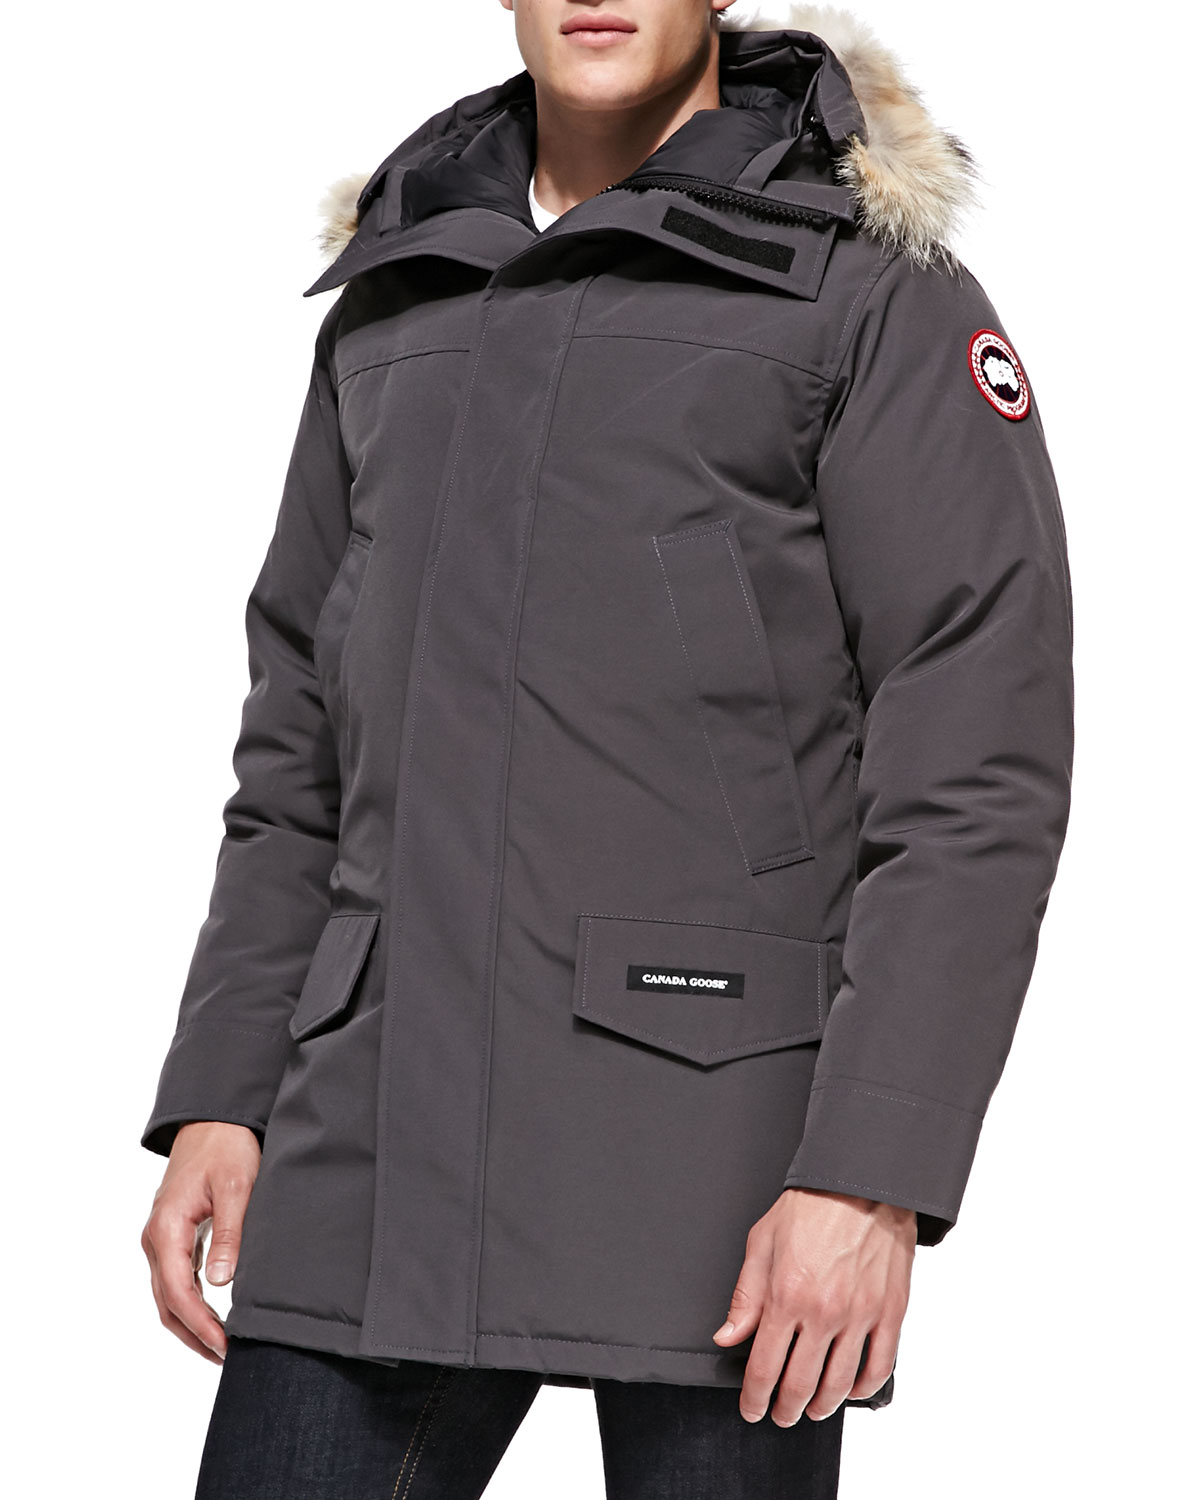 Canada goose Langford Arctictech Parka Jacket with Fur Hood Graphite in ...